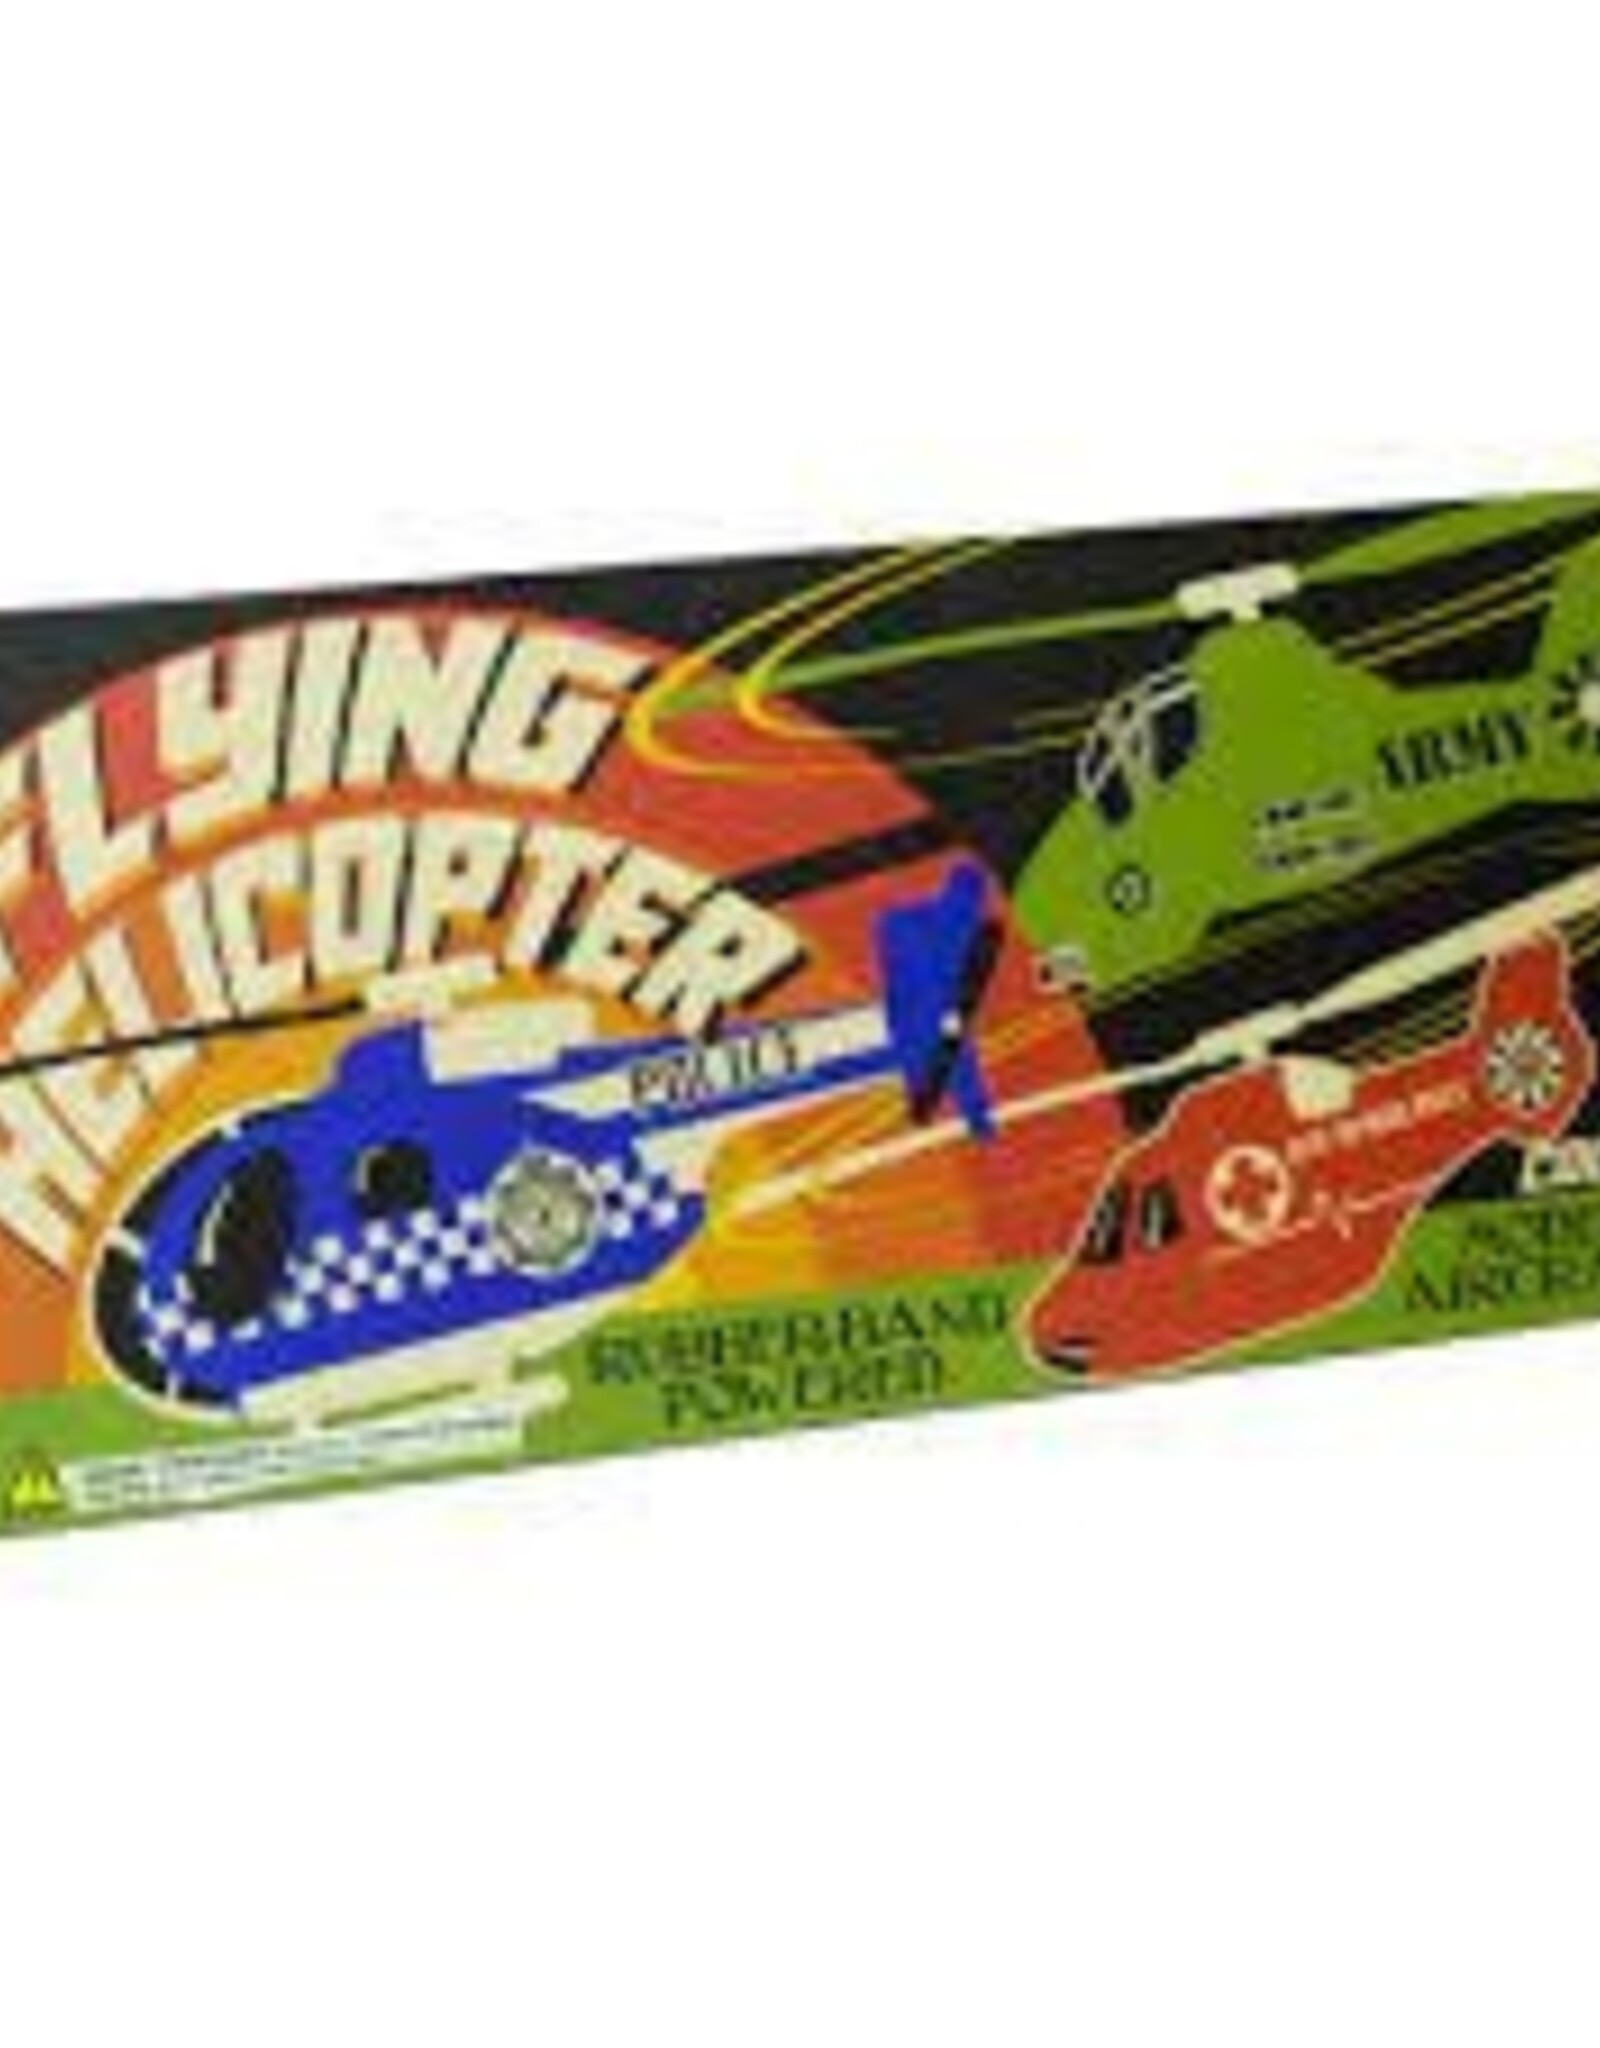 House of Marbles FLYING HELICOPTER KIT ASST.